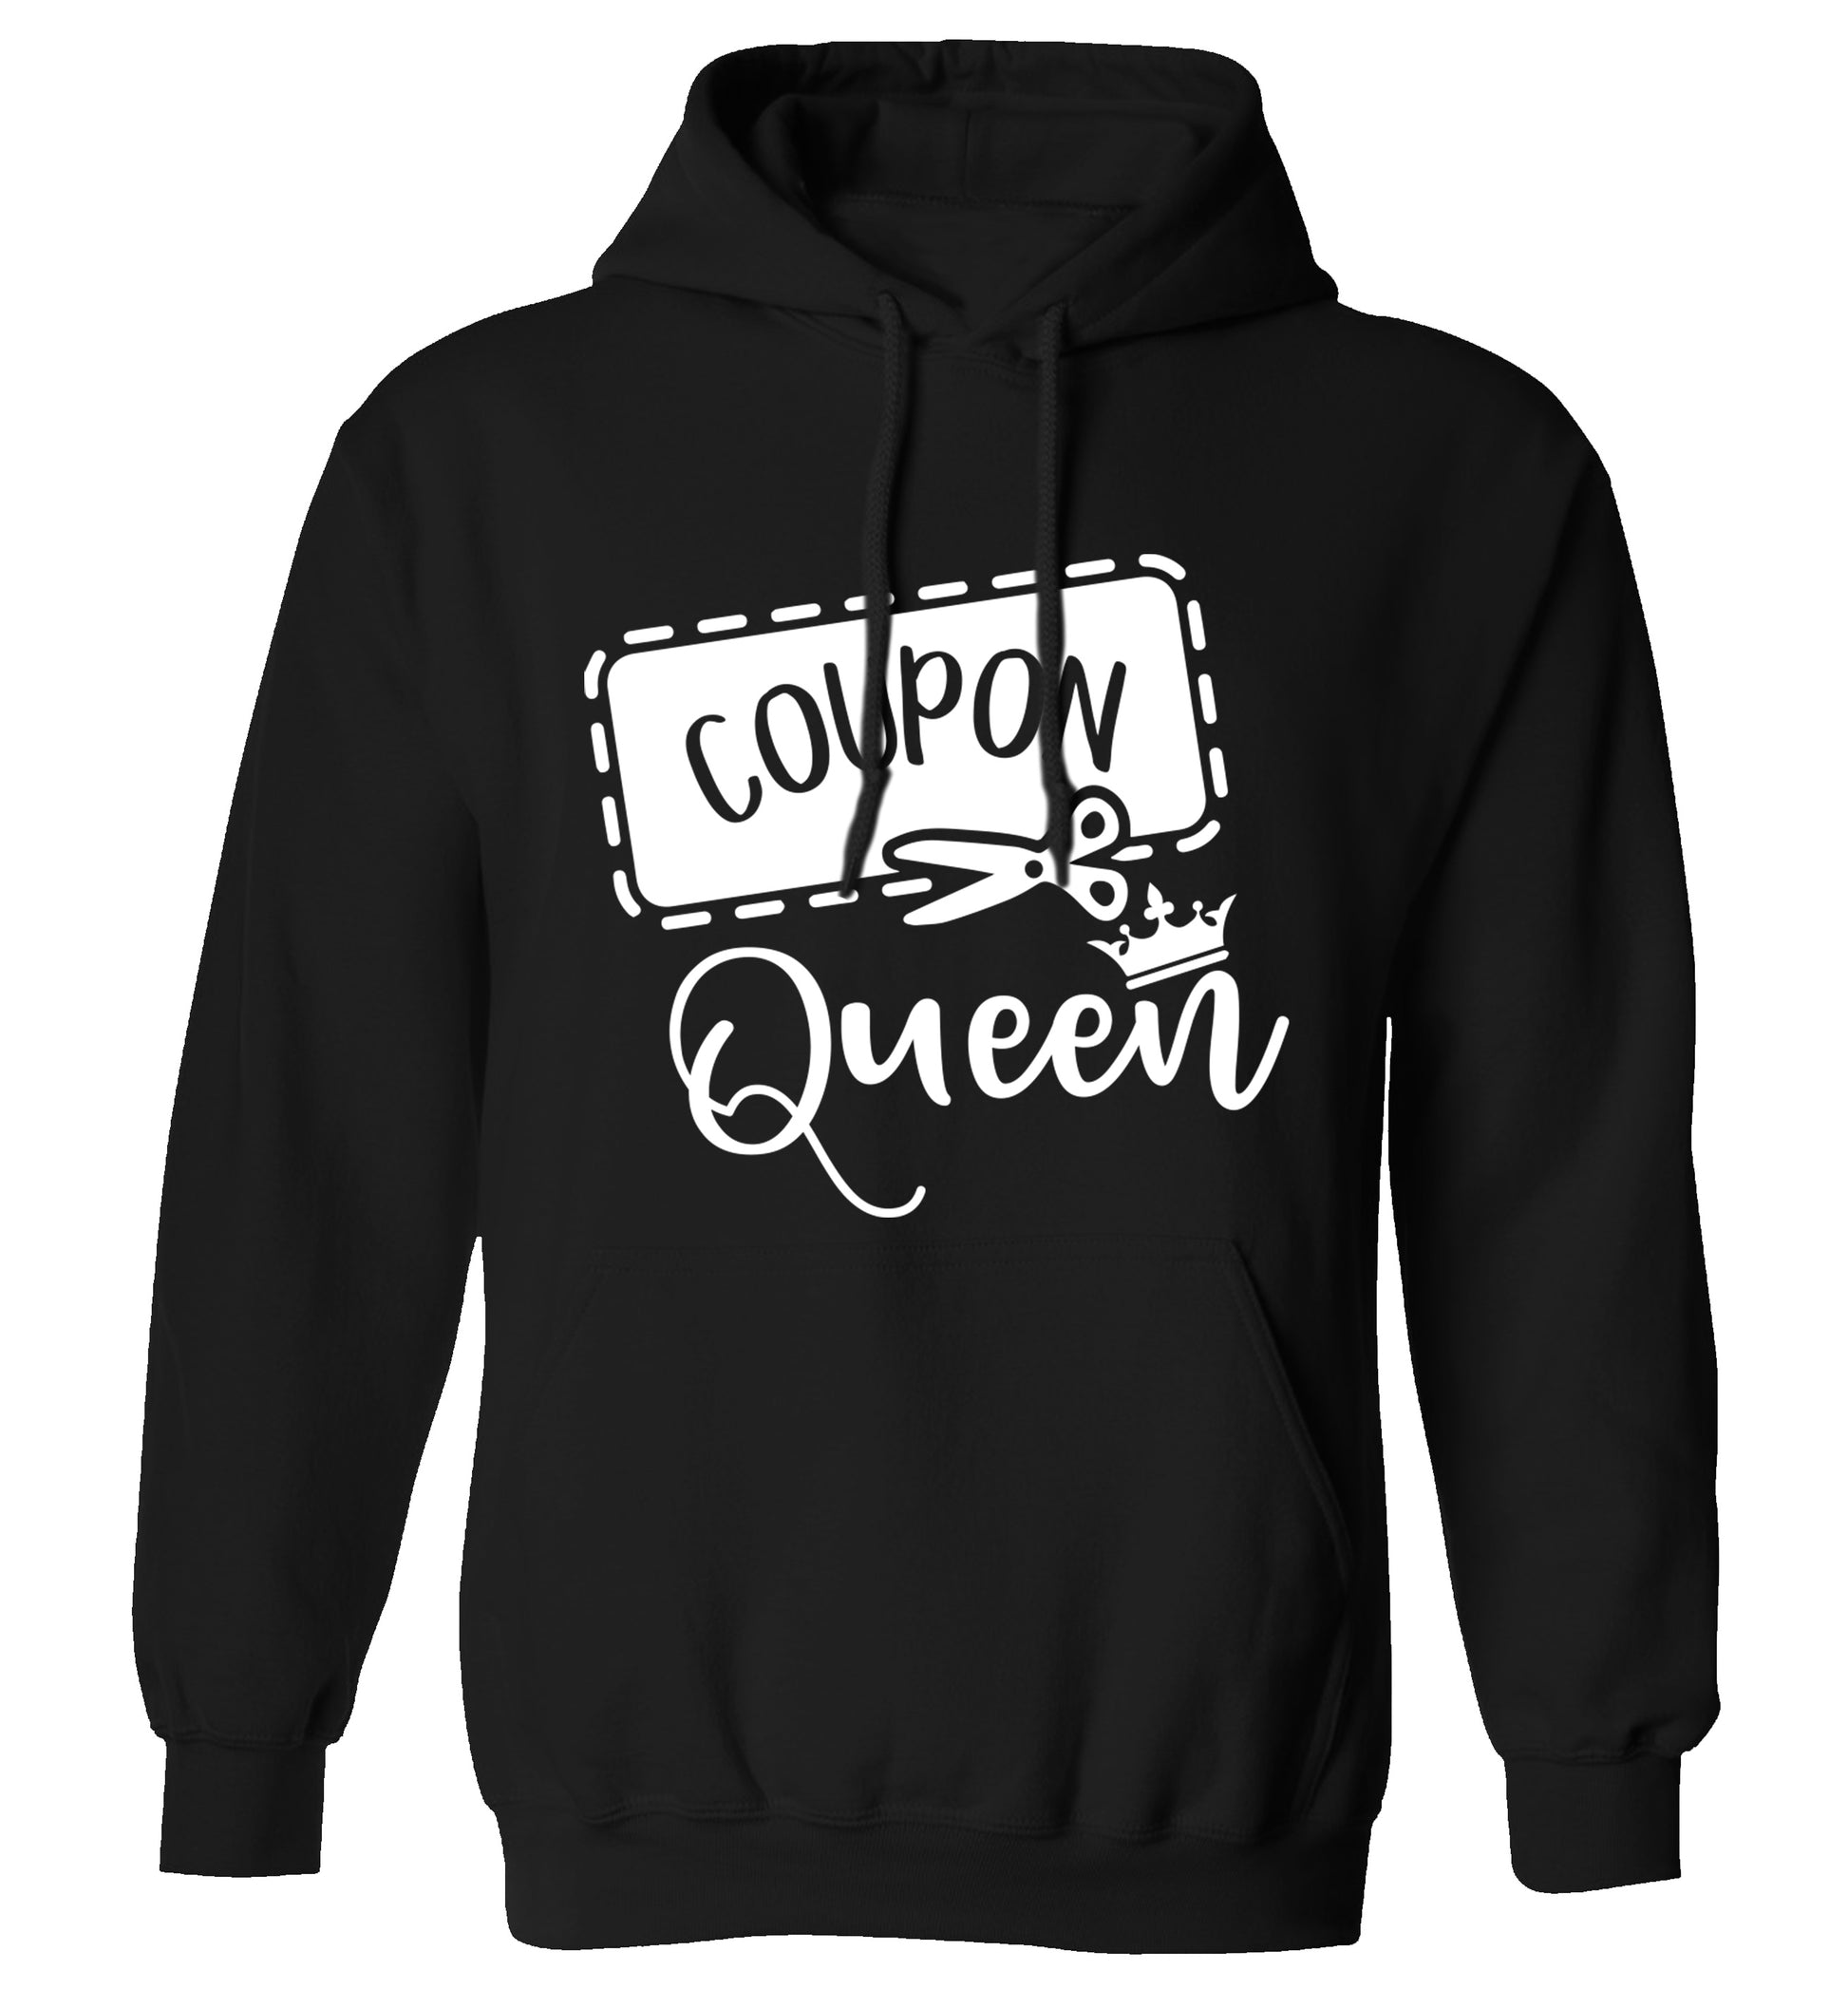 Coupon Queen adults unisex black hoodie 2XL